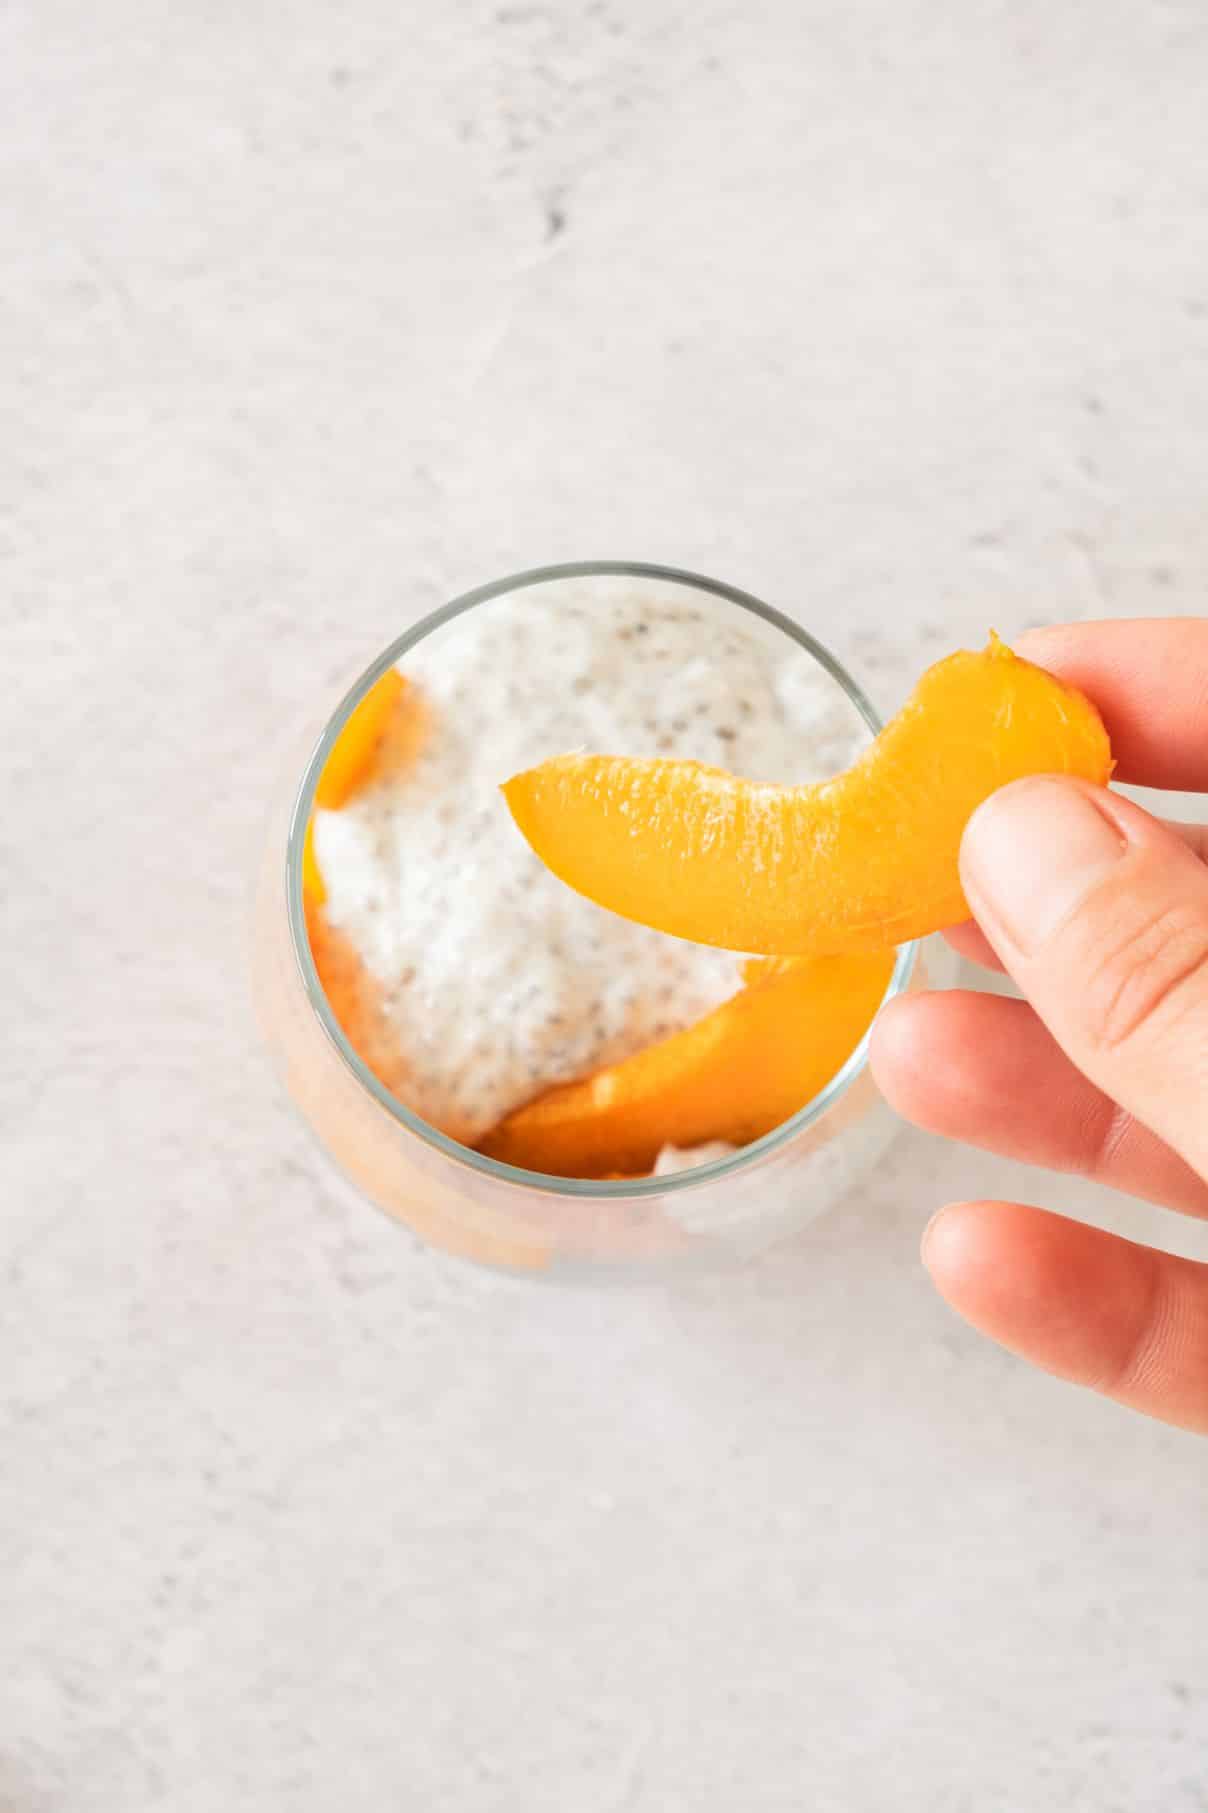 Layering slices of ripe apricot on top of a creamy chia pudding